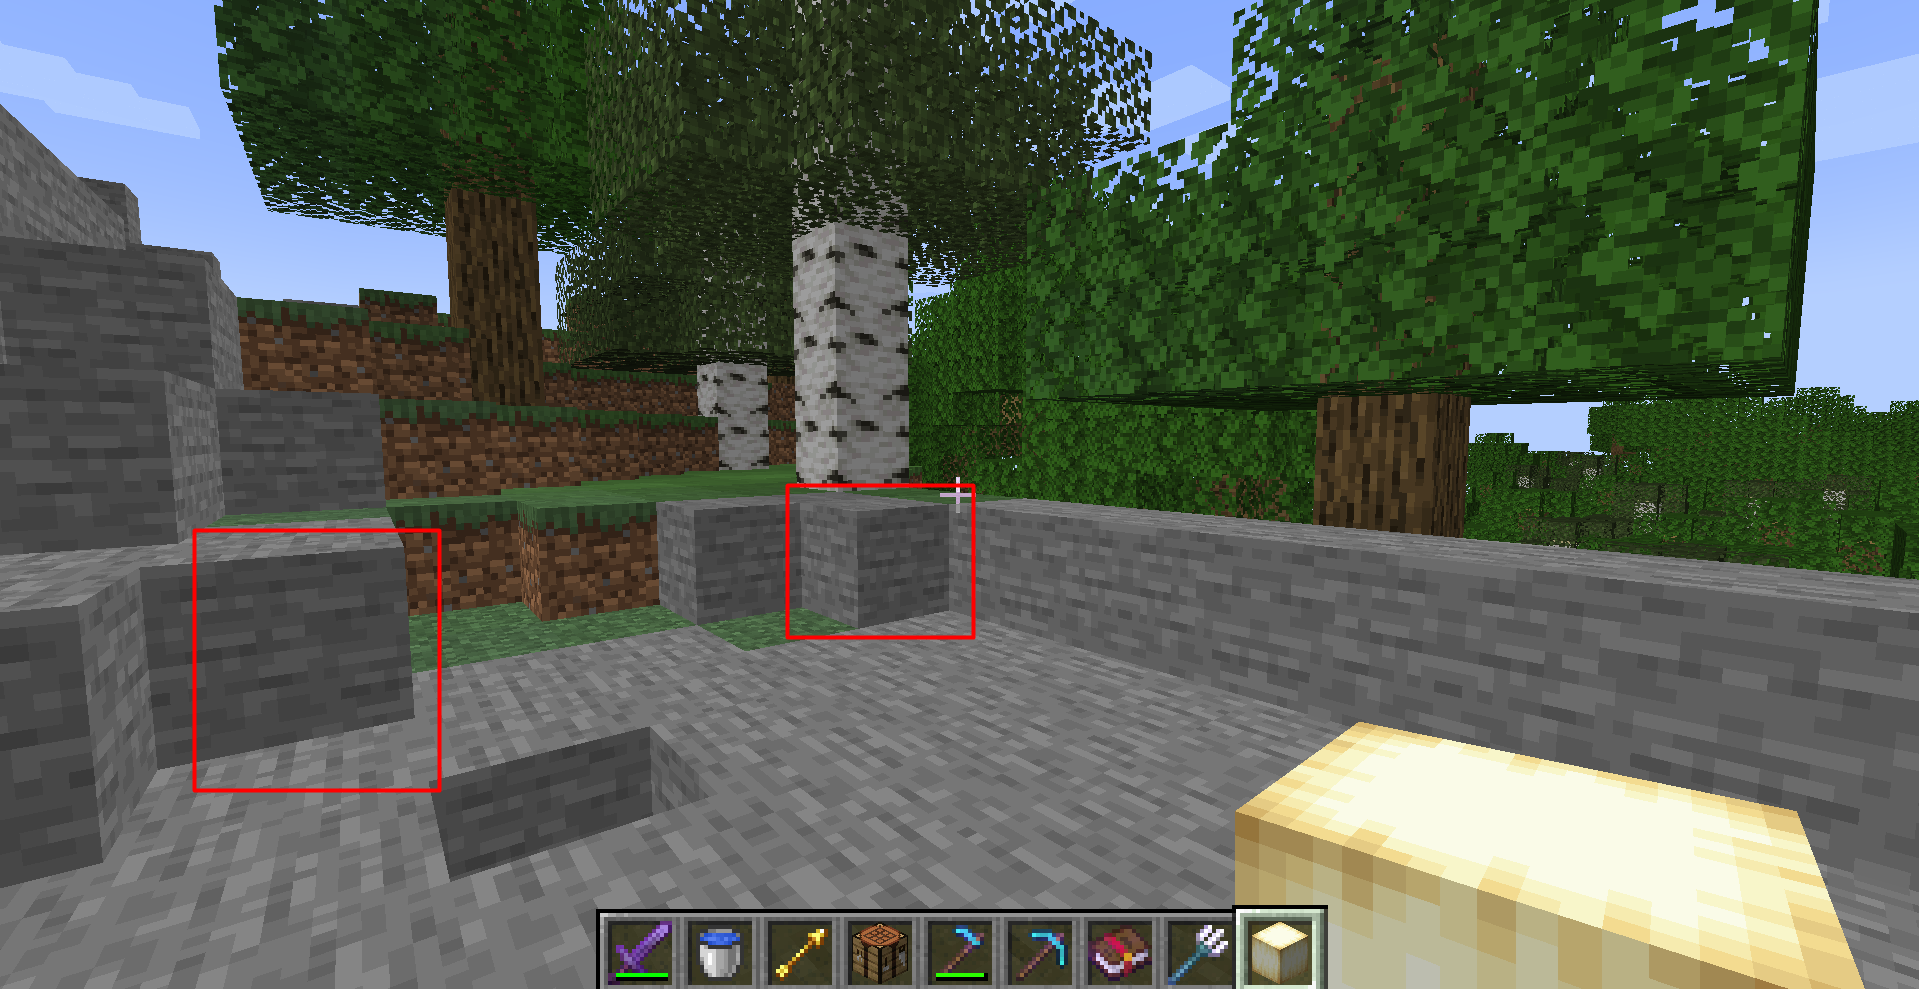 how do you make chiseled stone block in a minecraft